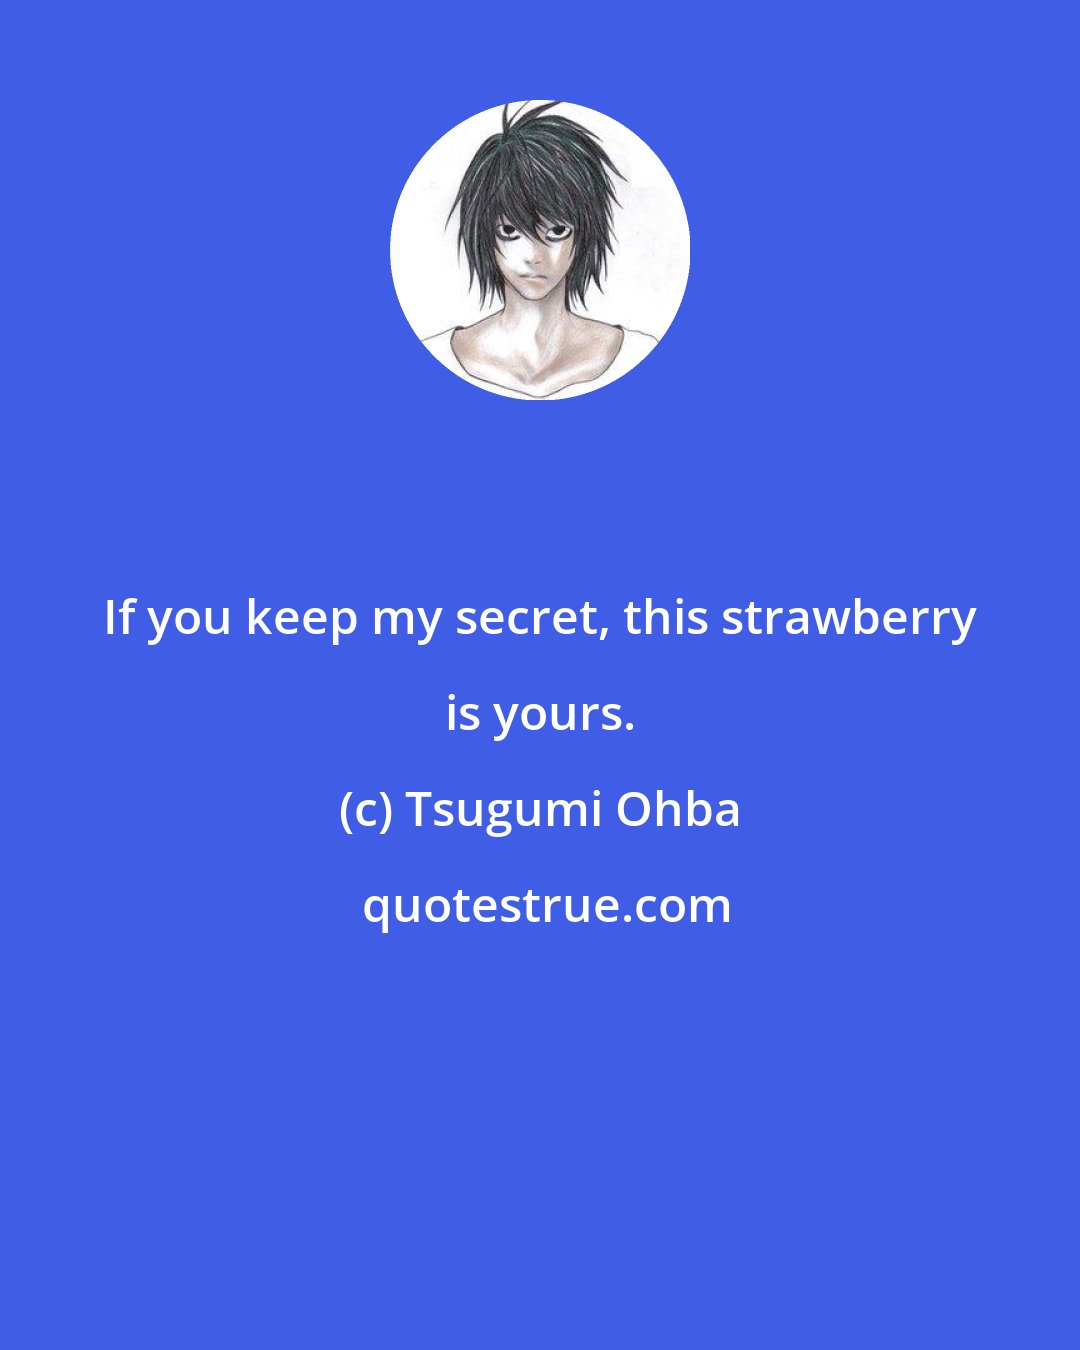 Tsugumi Ohba: If you keep my secret, this strawberry is yours.